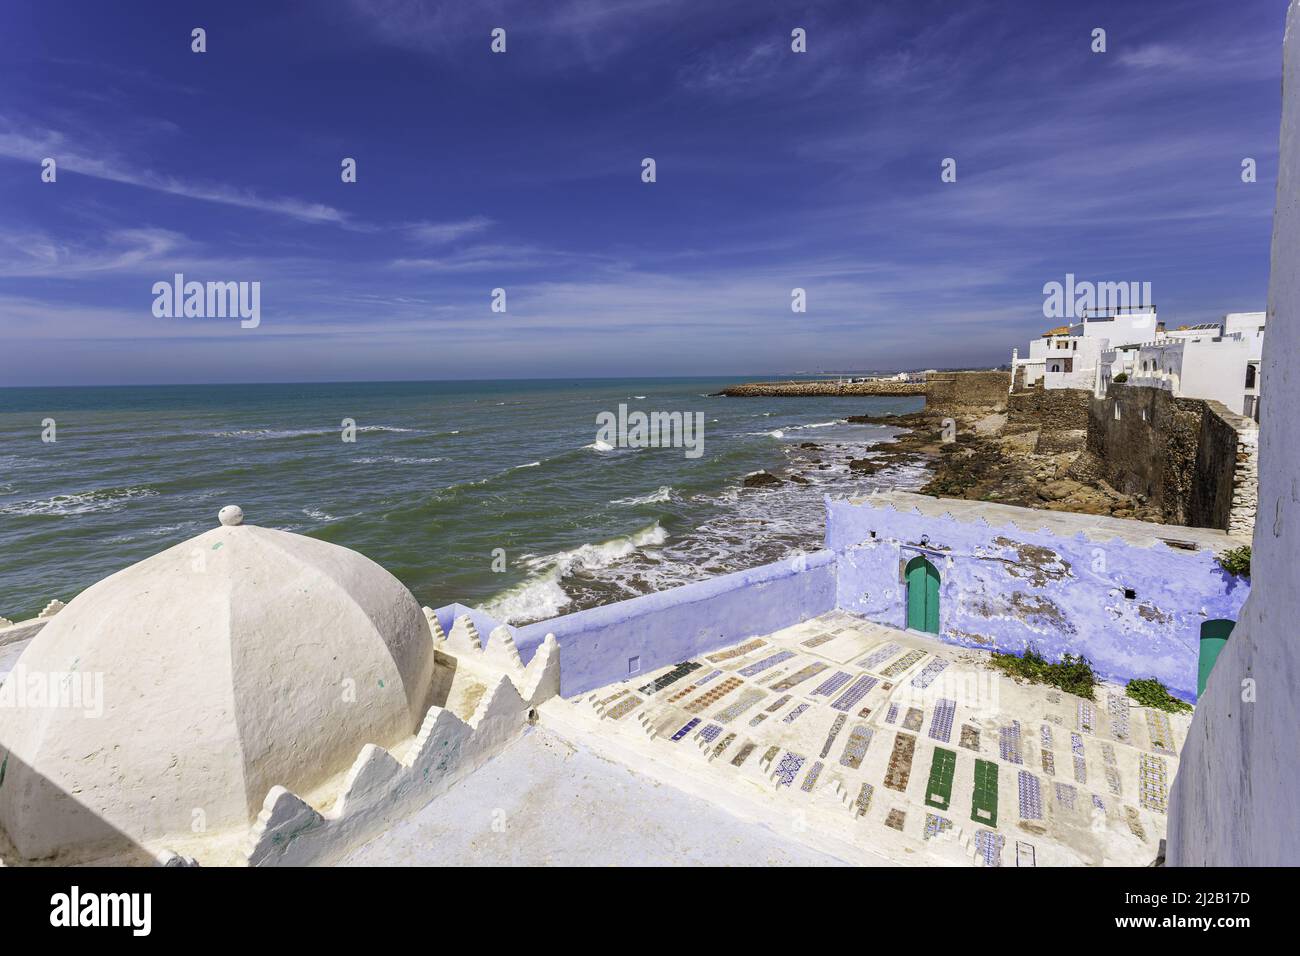 Admiring the ancient ocean front fortress of Asilah, Morocco. White and blue washed walls of houses reminding of the ancient city. Stock Photo